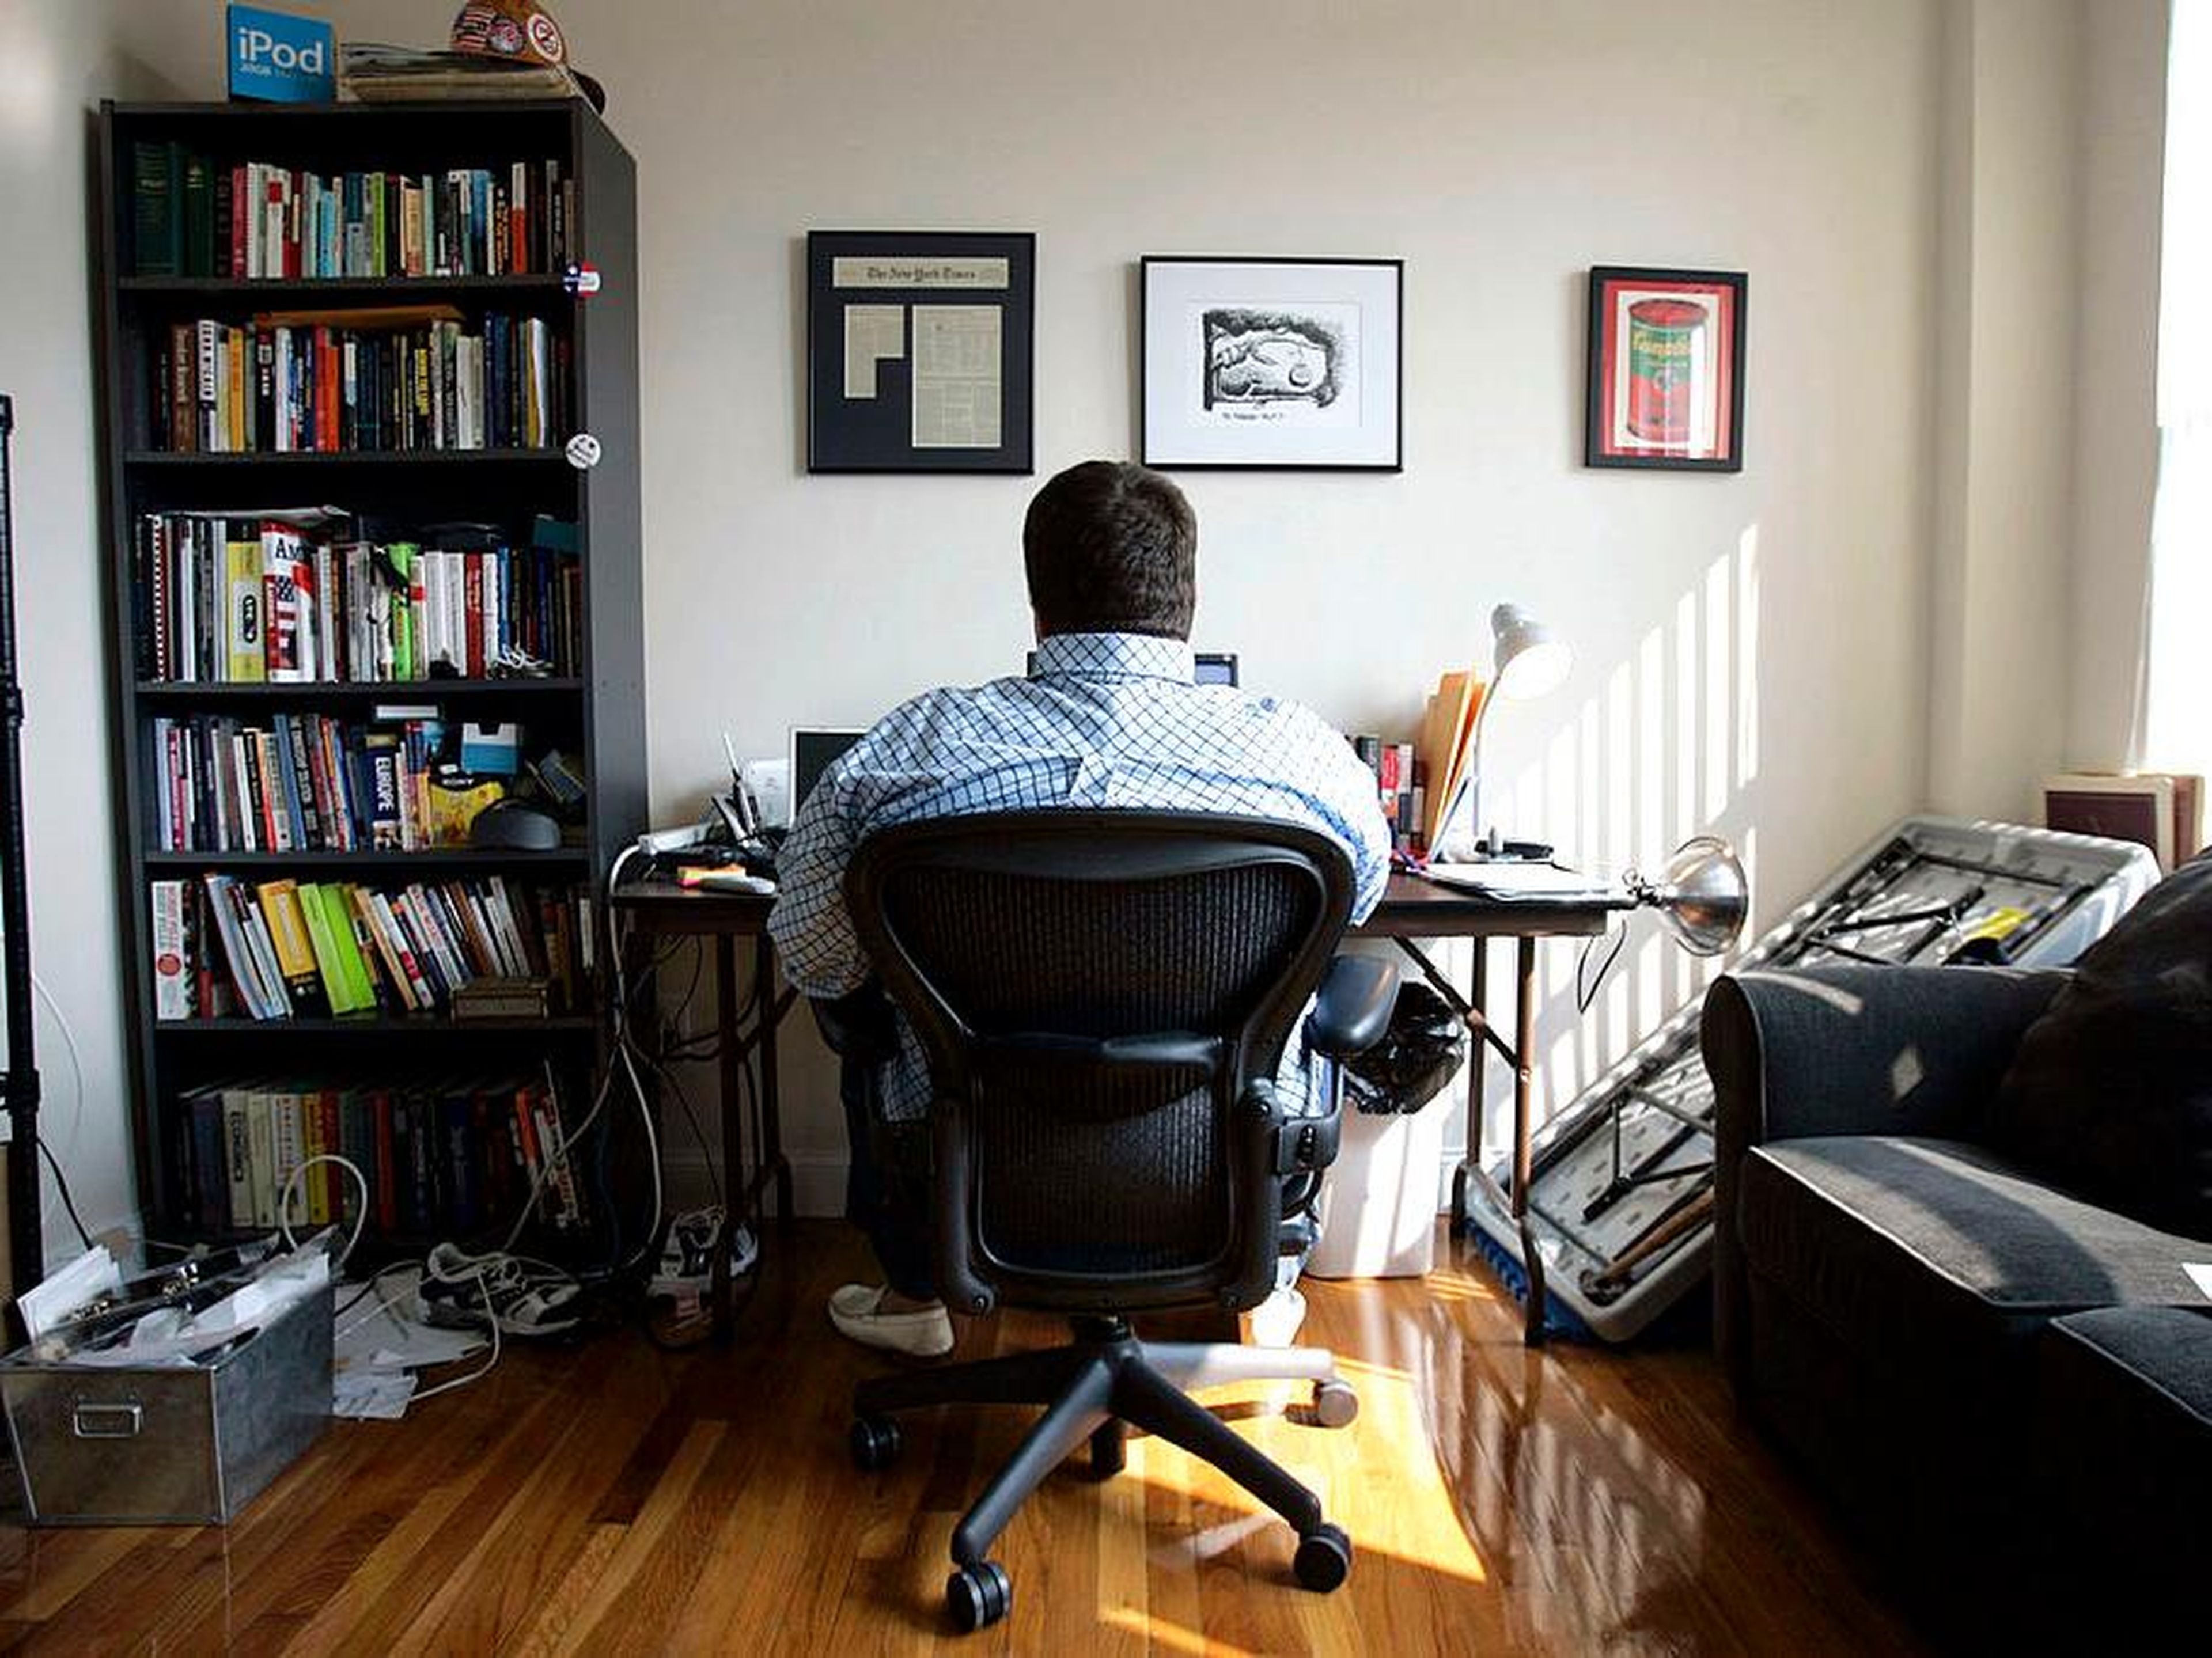 It's crucial to find or create a space where you can focus on your work.